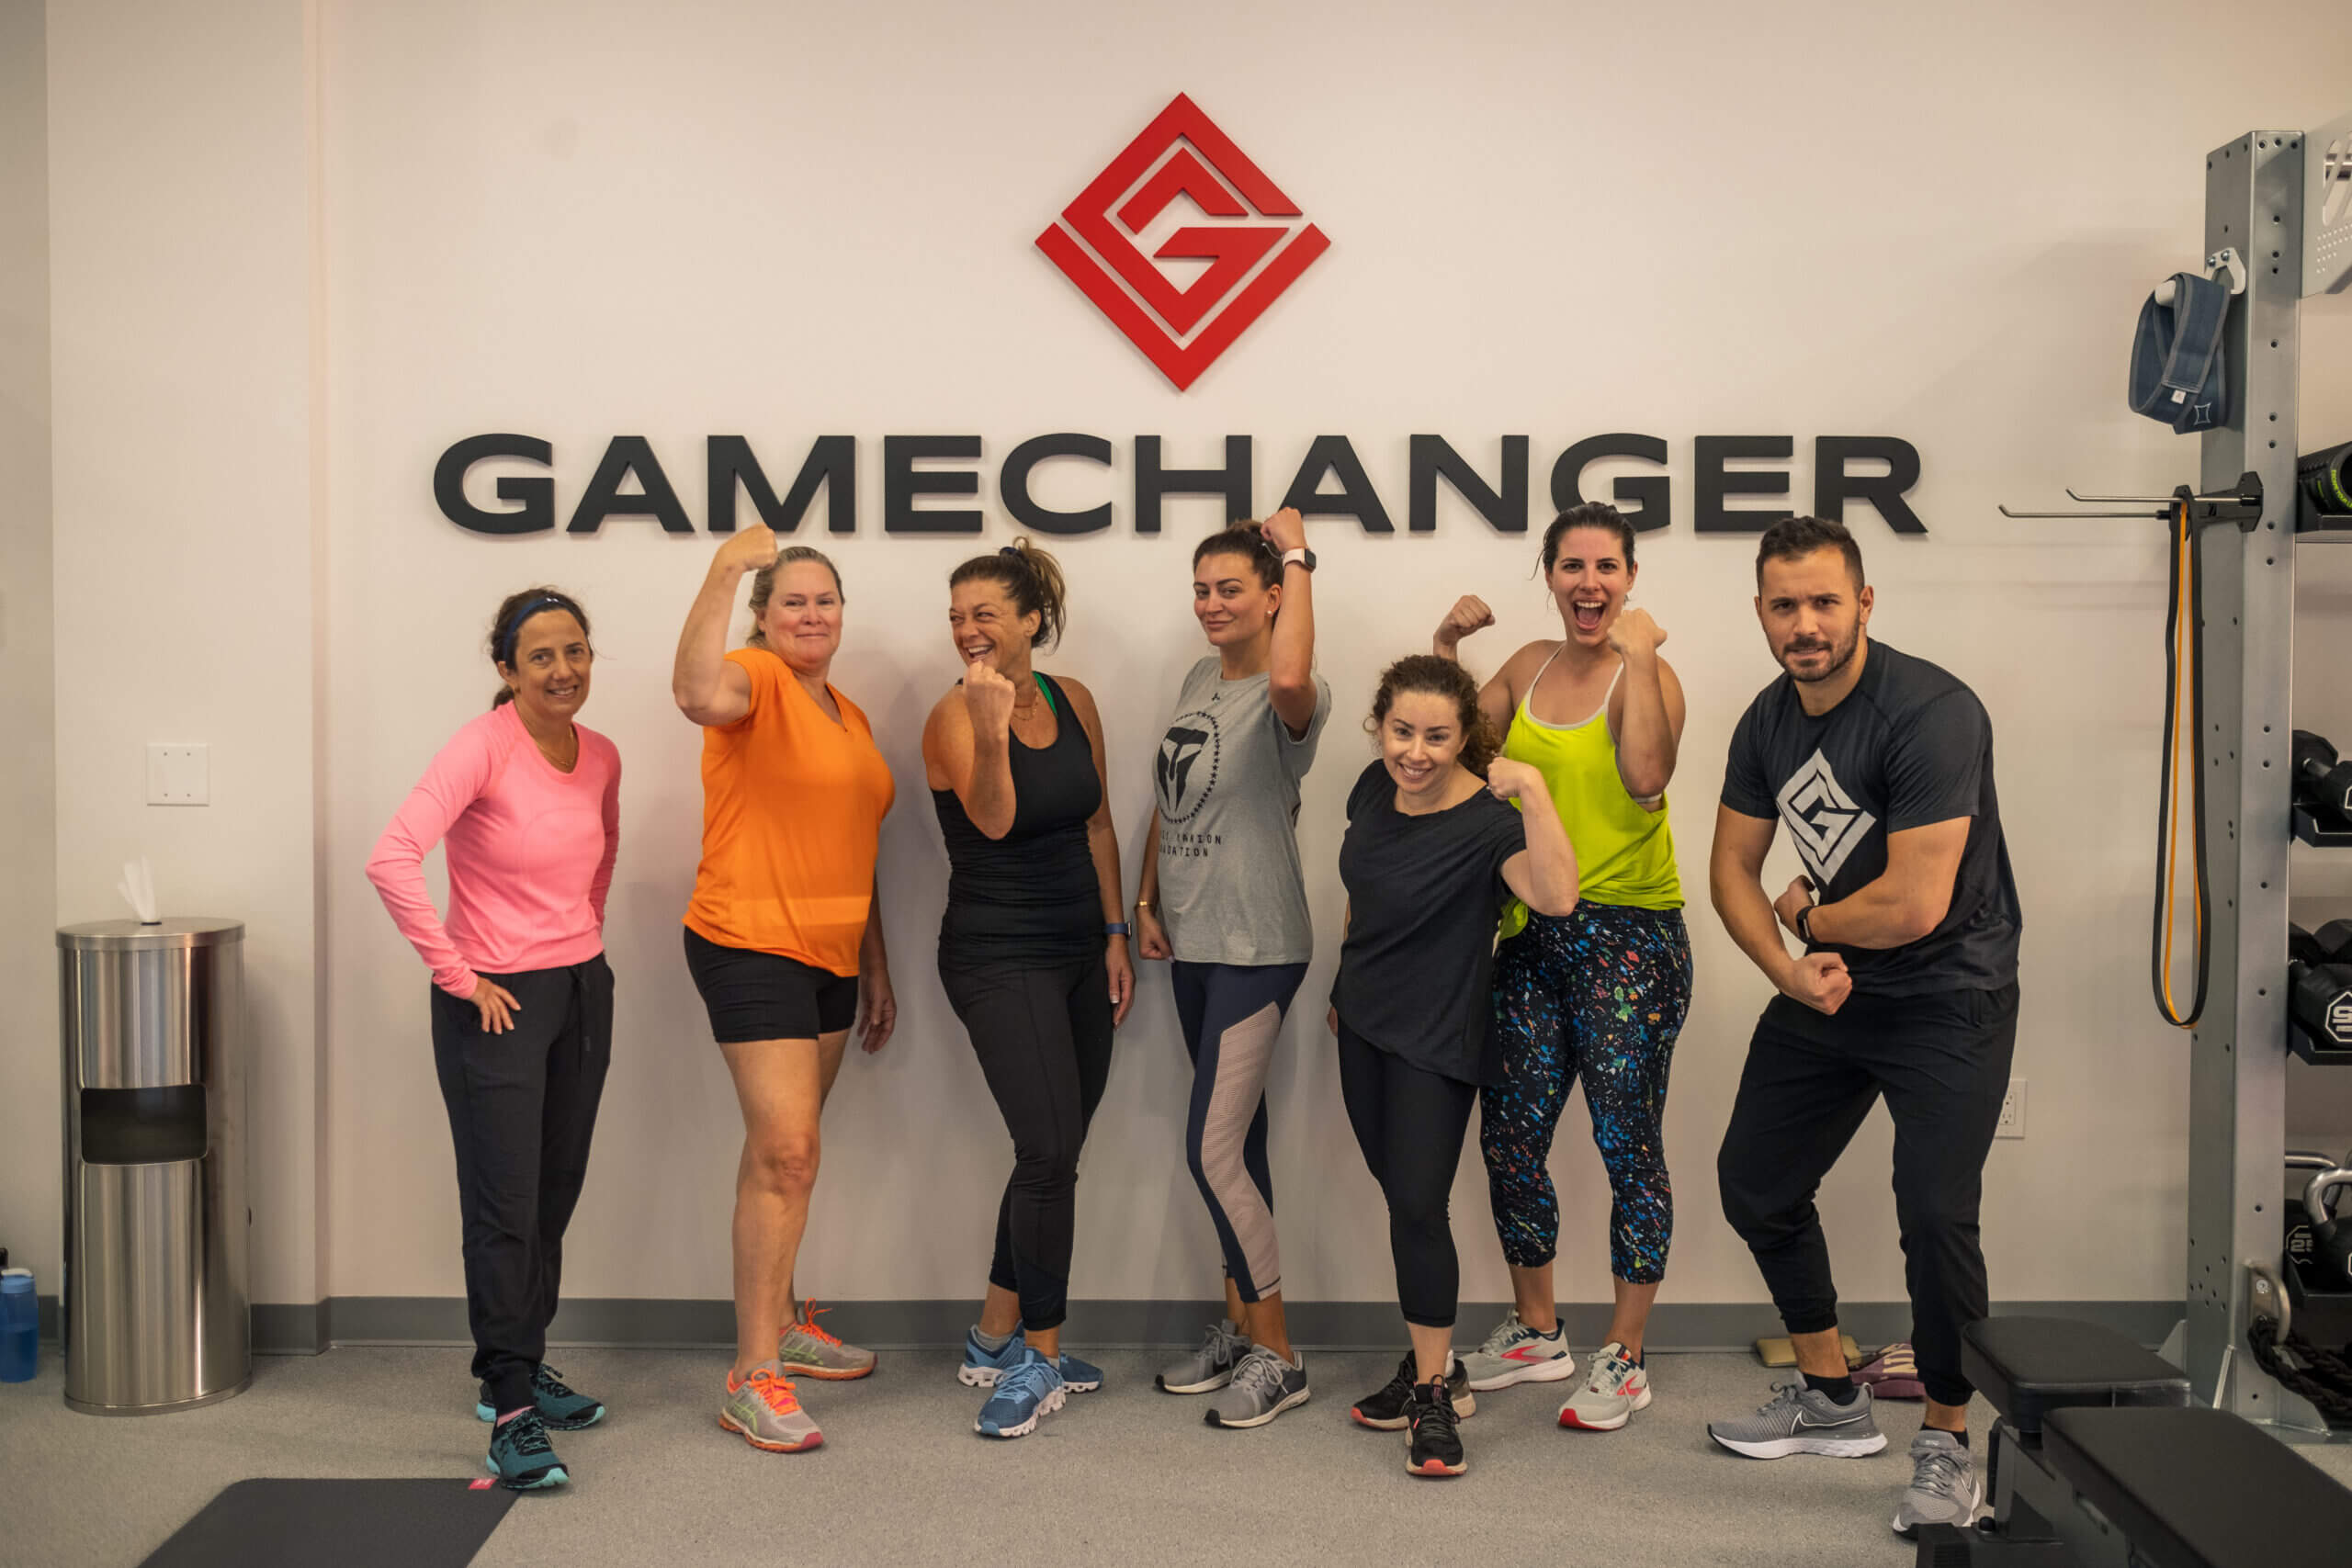 a GROUP OF PEOPLE STANDING AT THE GAME CHANGER LOGO